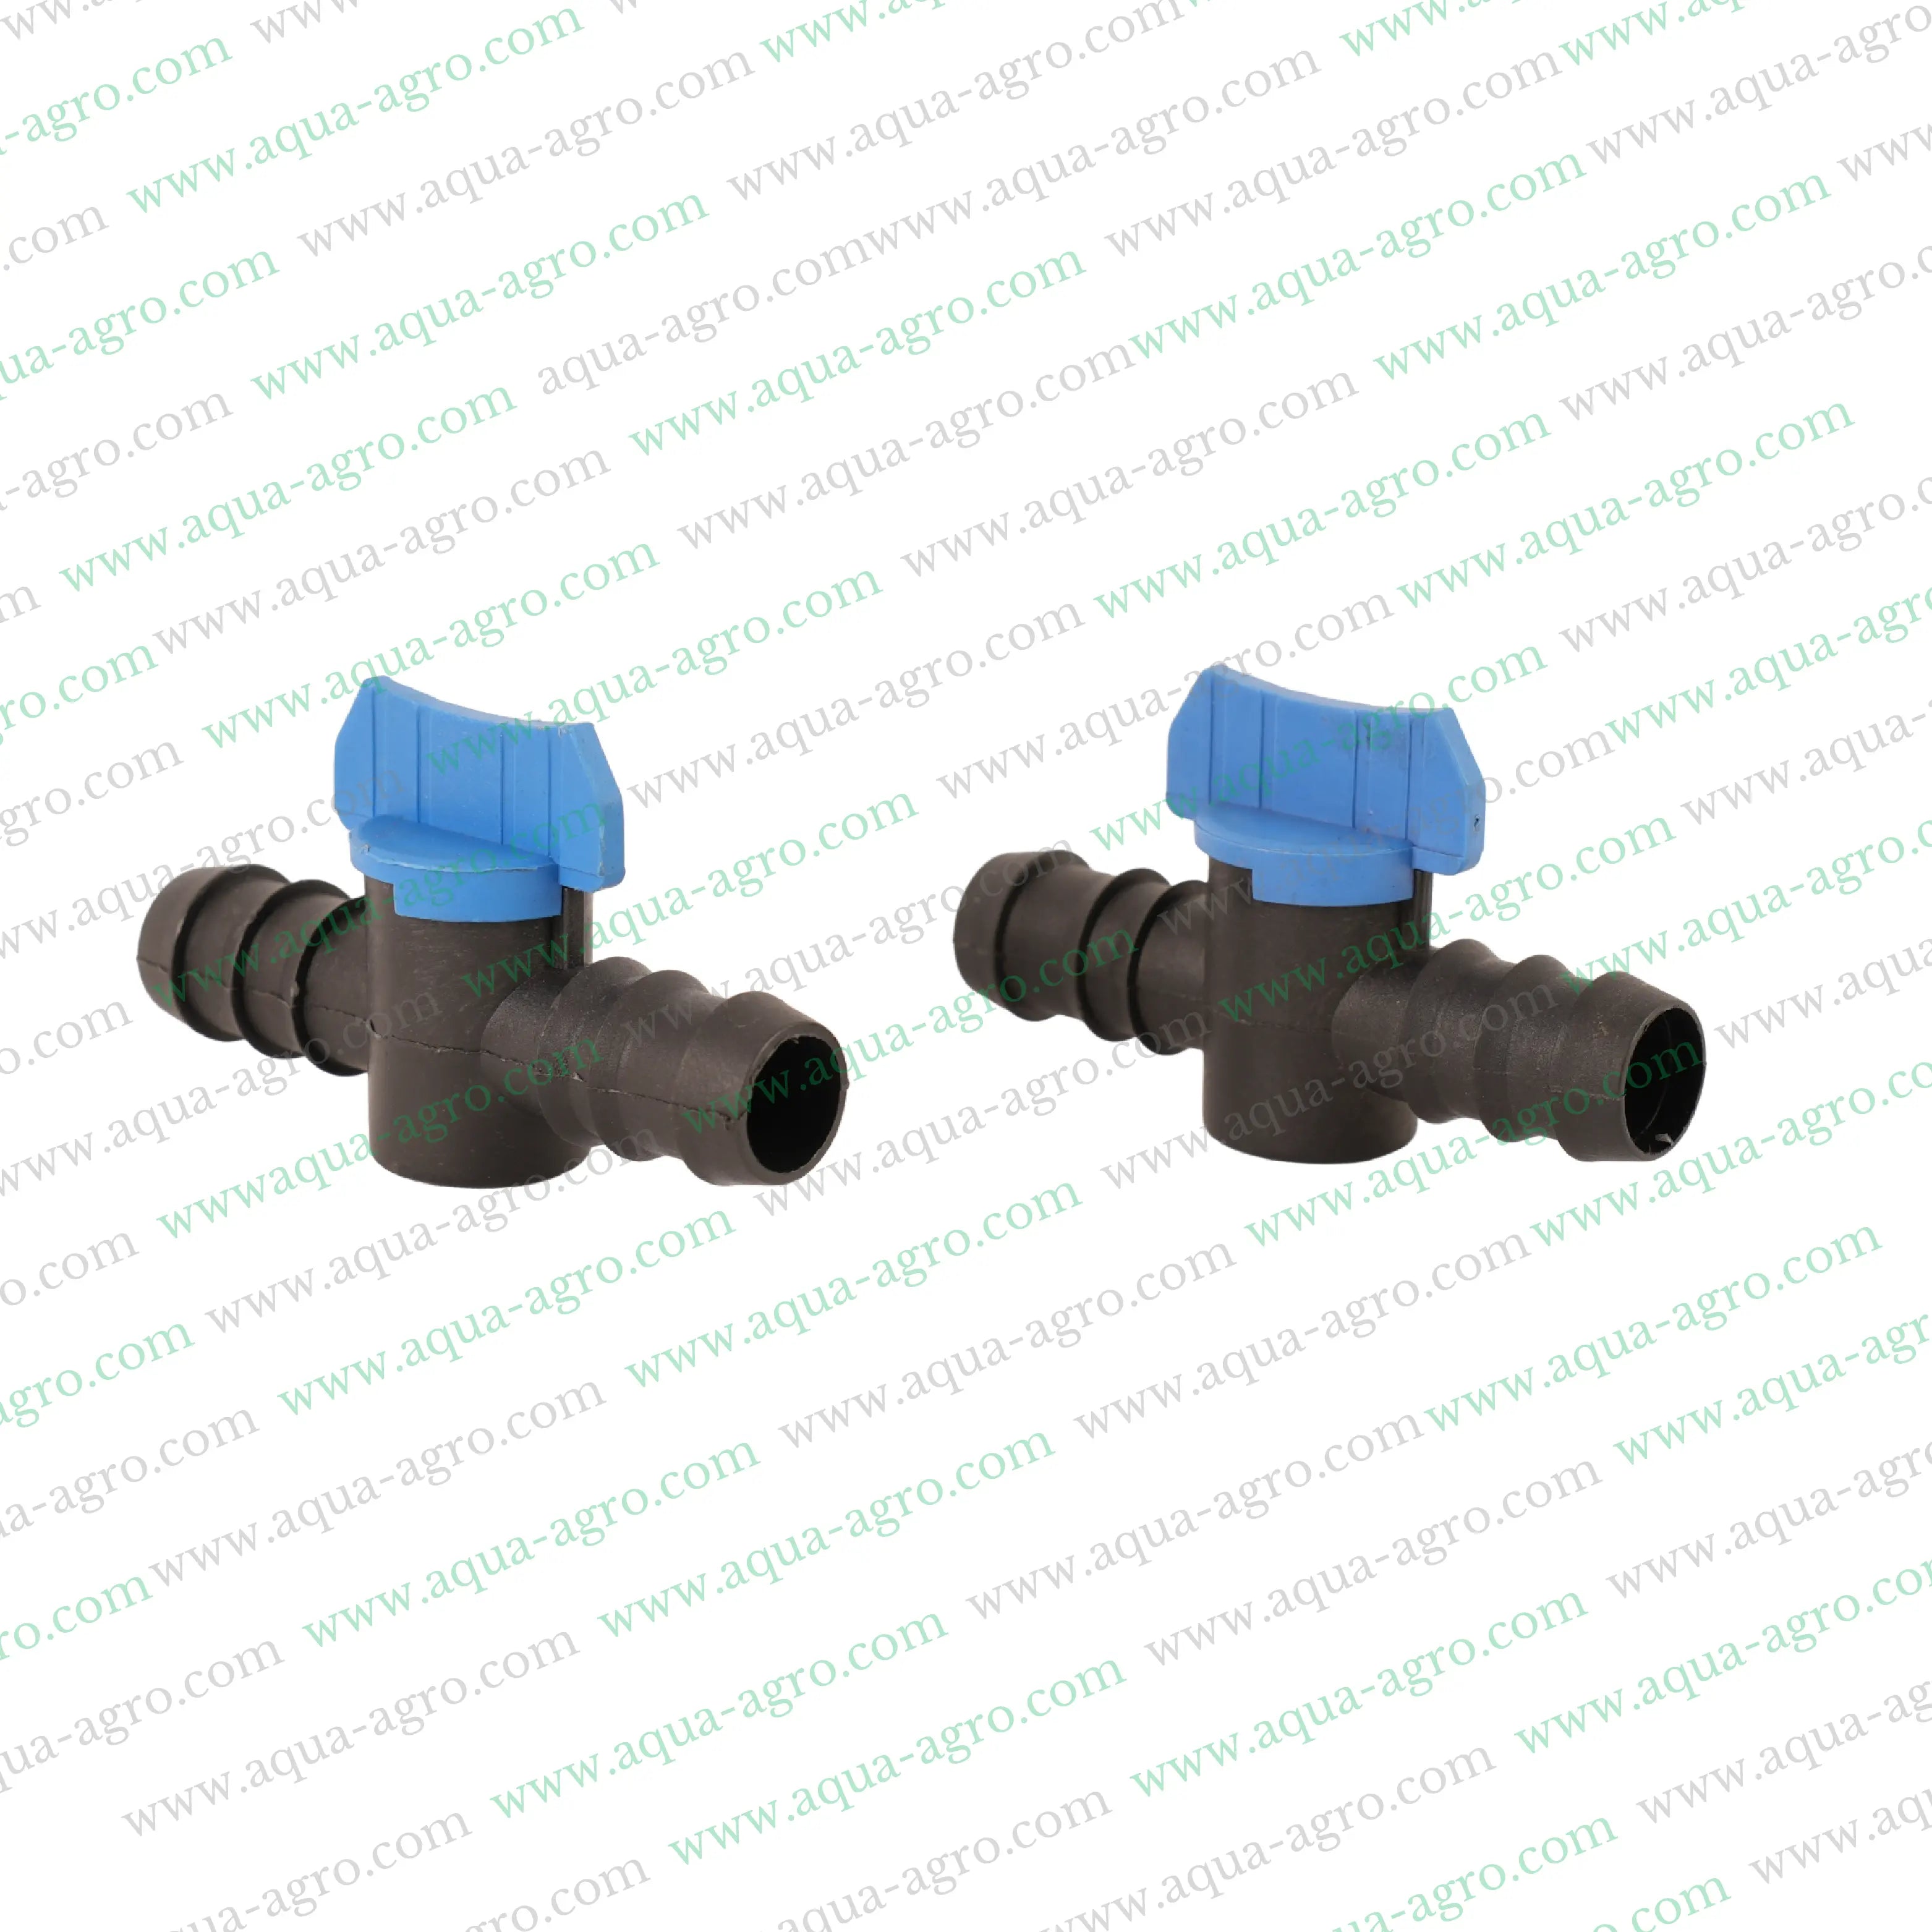 AQUA - AGRO | Drip Fittings And Accessories - Barbed Fittings - Lite - Drip tap - 16mm